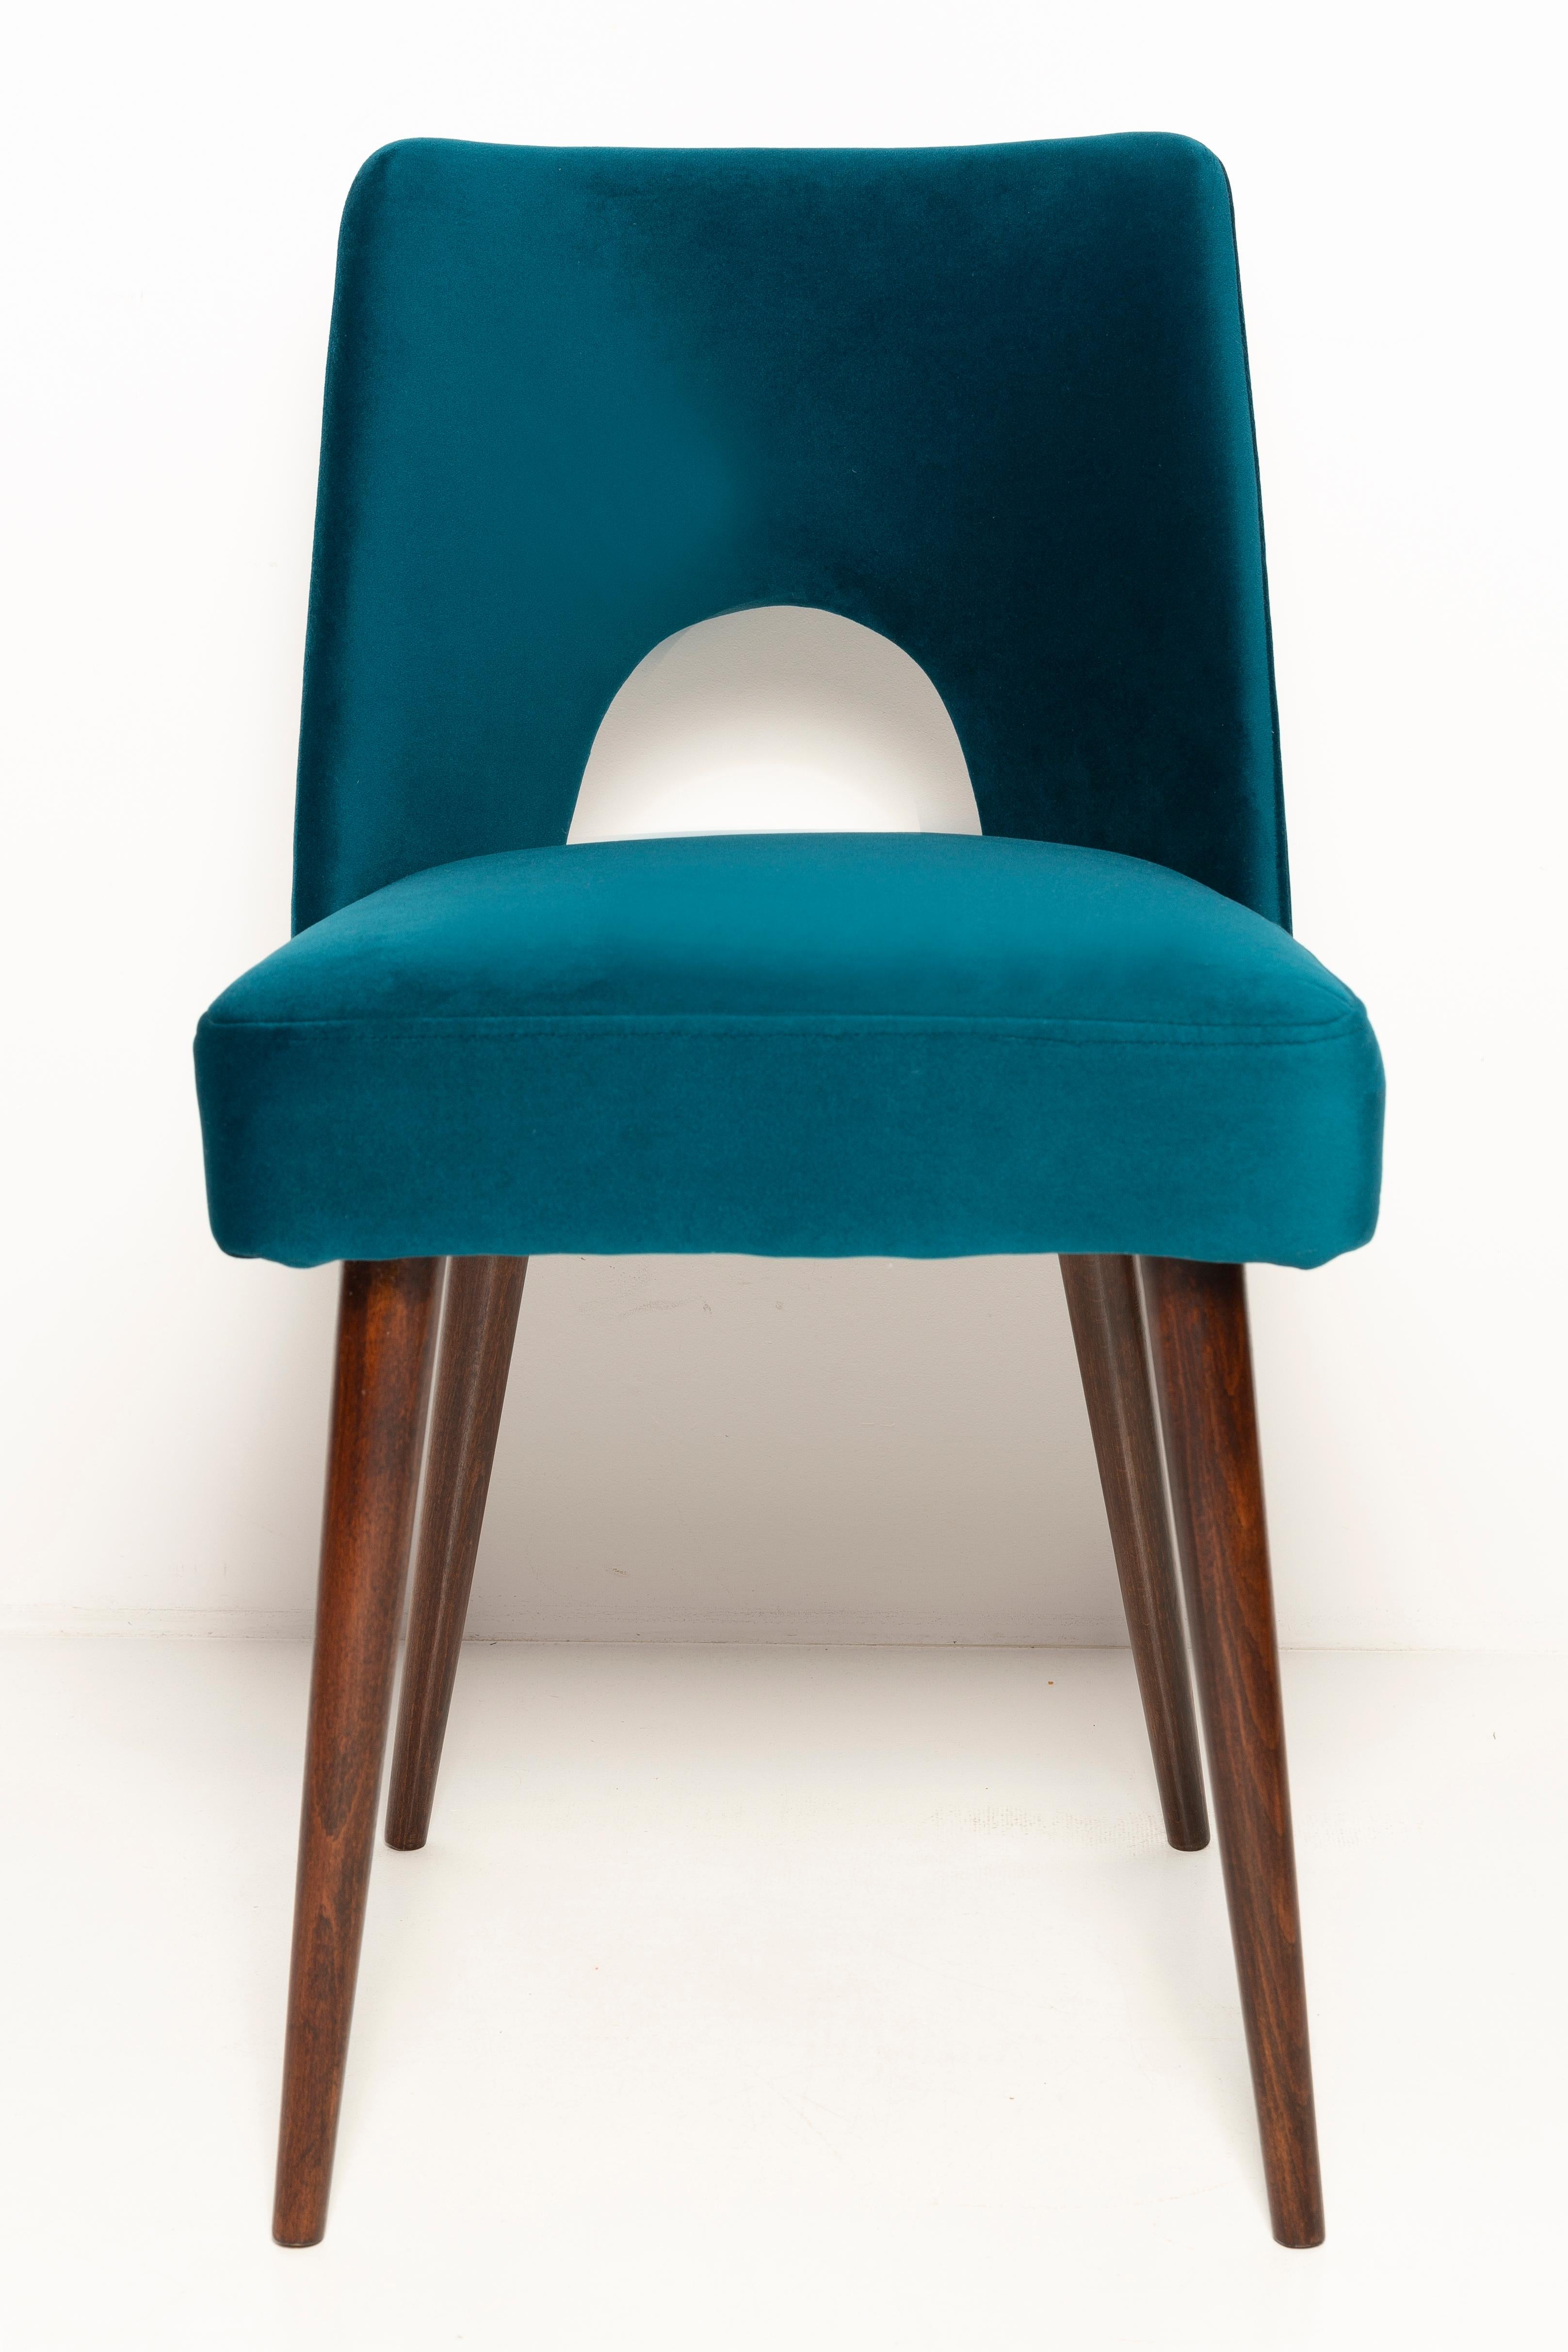 Hand-Crafted Mid-Century Emerald Green Velvet 'Shell' Chair, Europe, 1960s For Sale